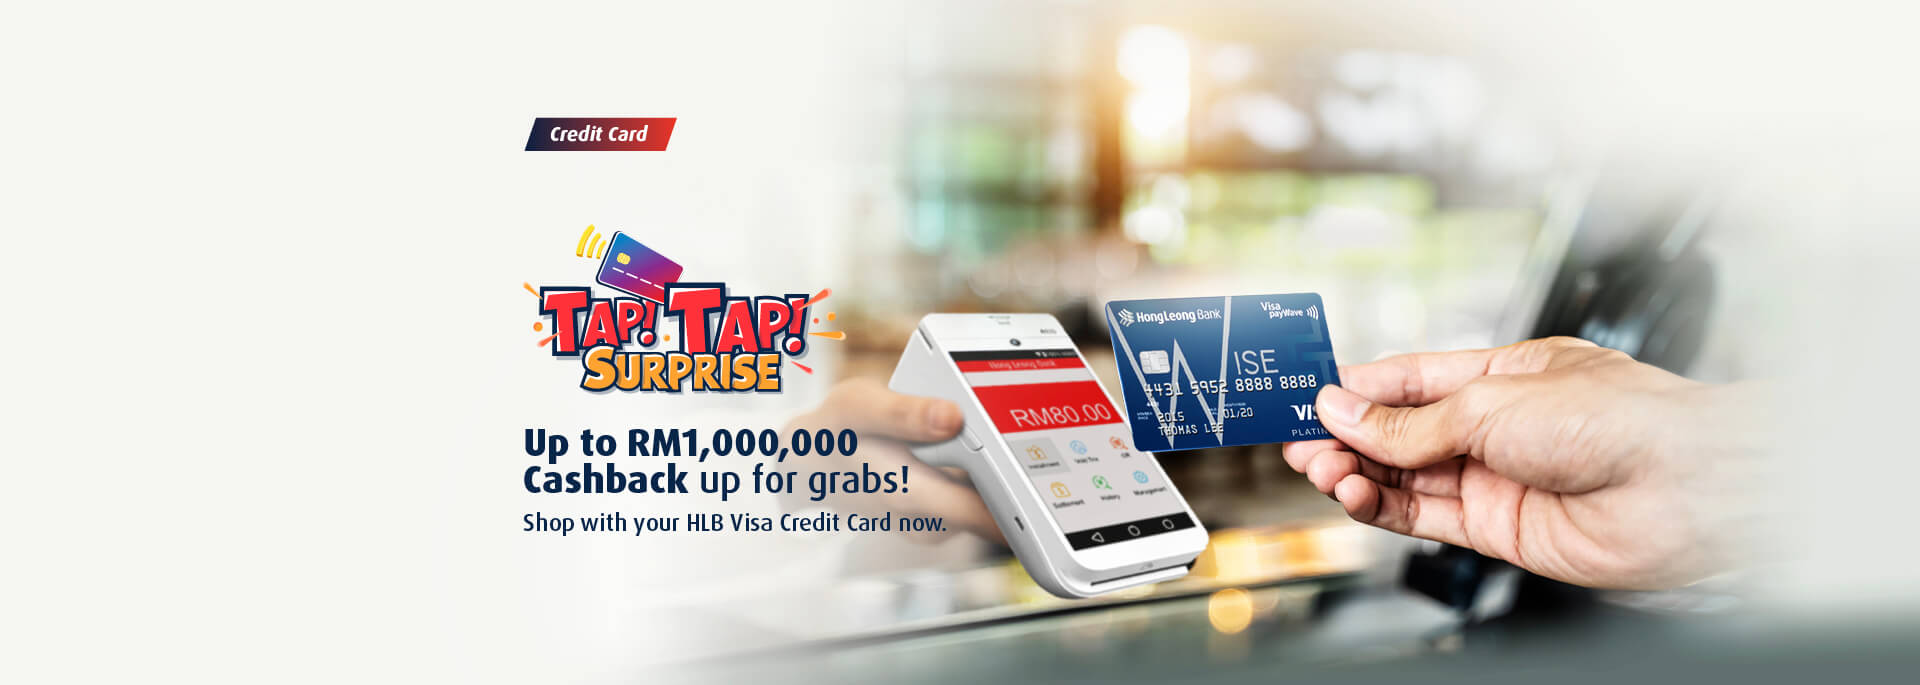 Stand a chance to get up to RM1,000 rebates every day with your HLB Visa Credit Card